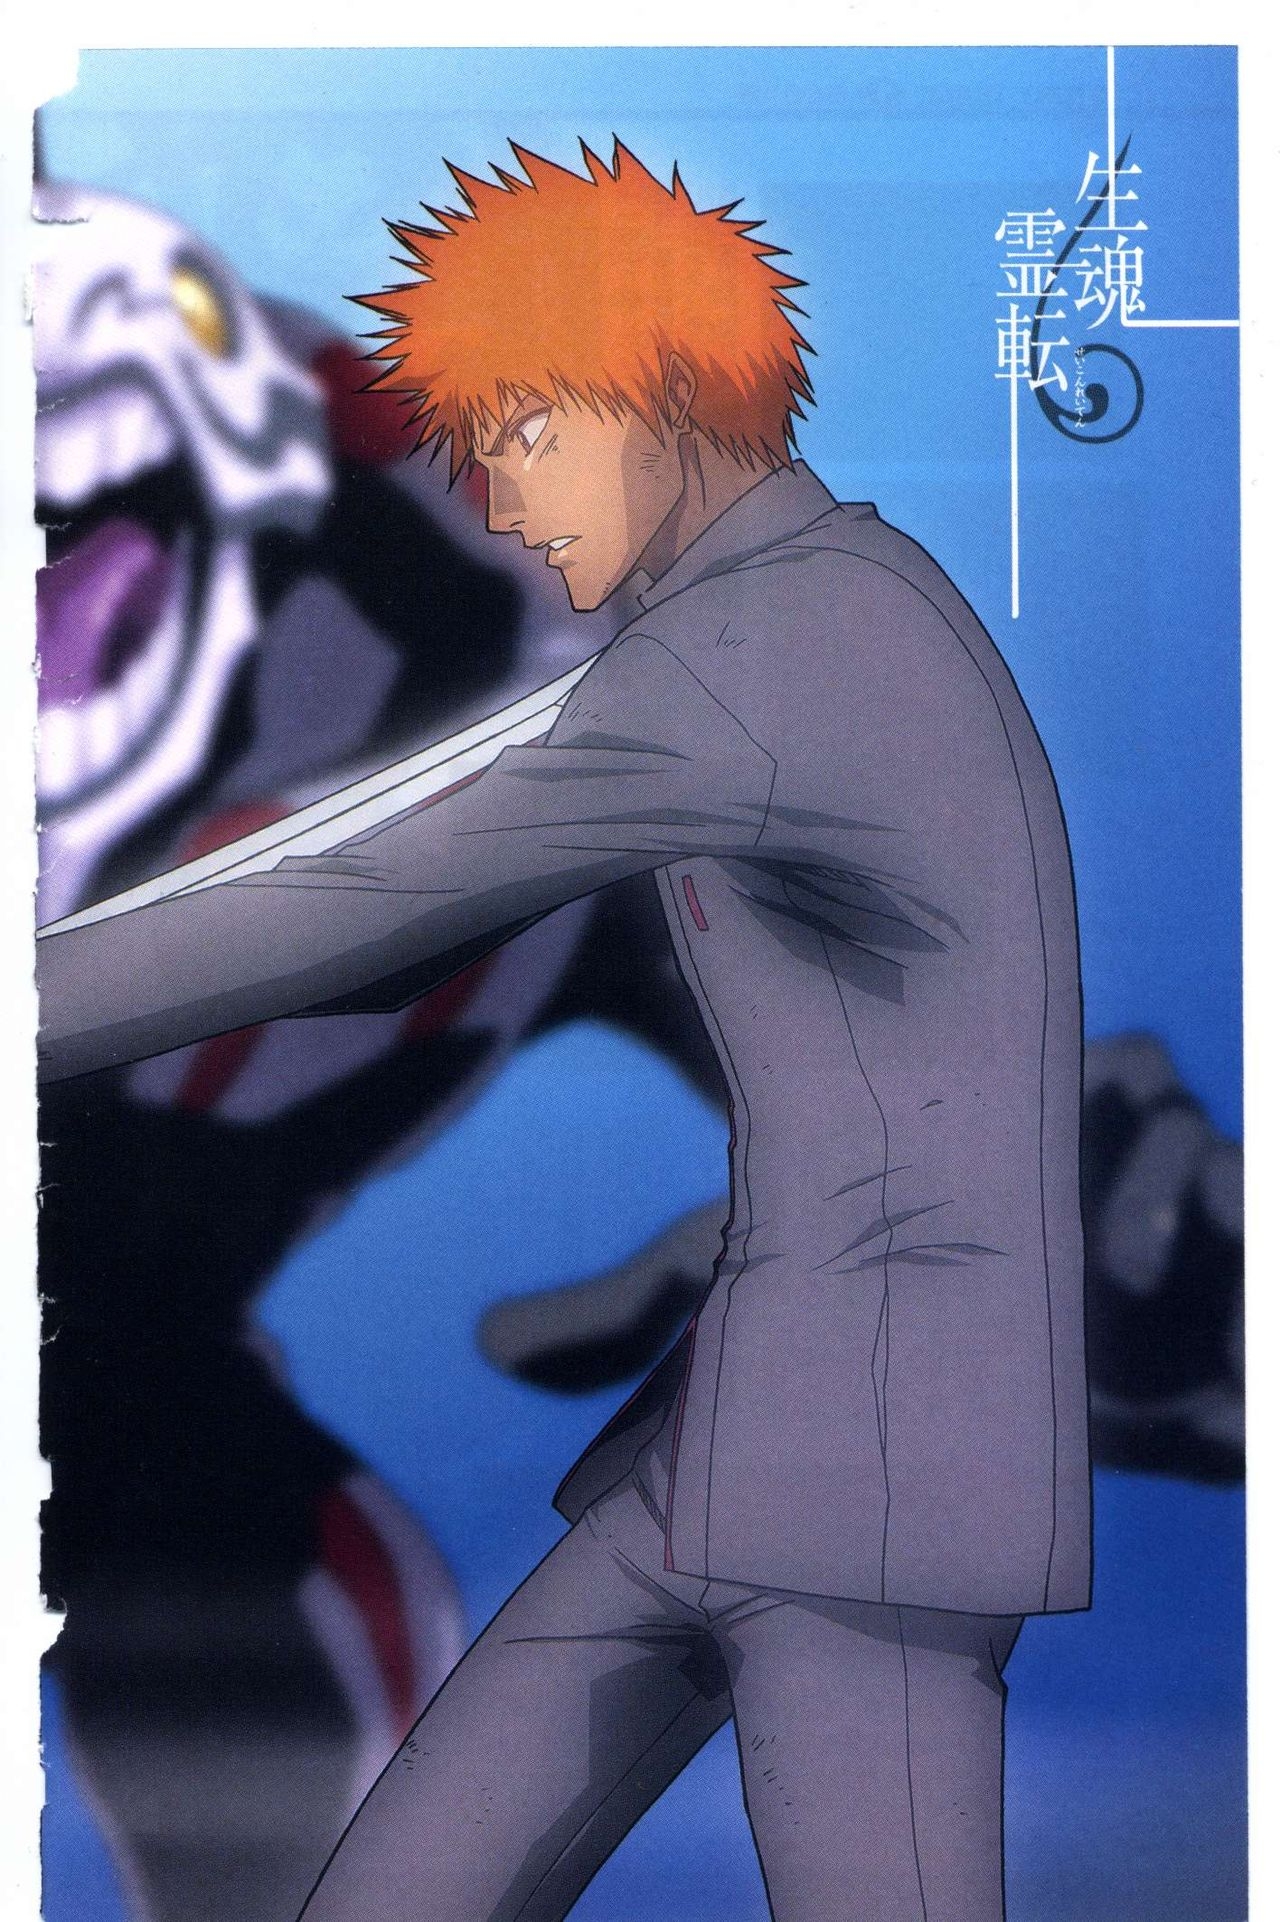 Bleach: Official Animation Book VIBEs 32